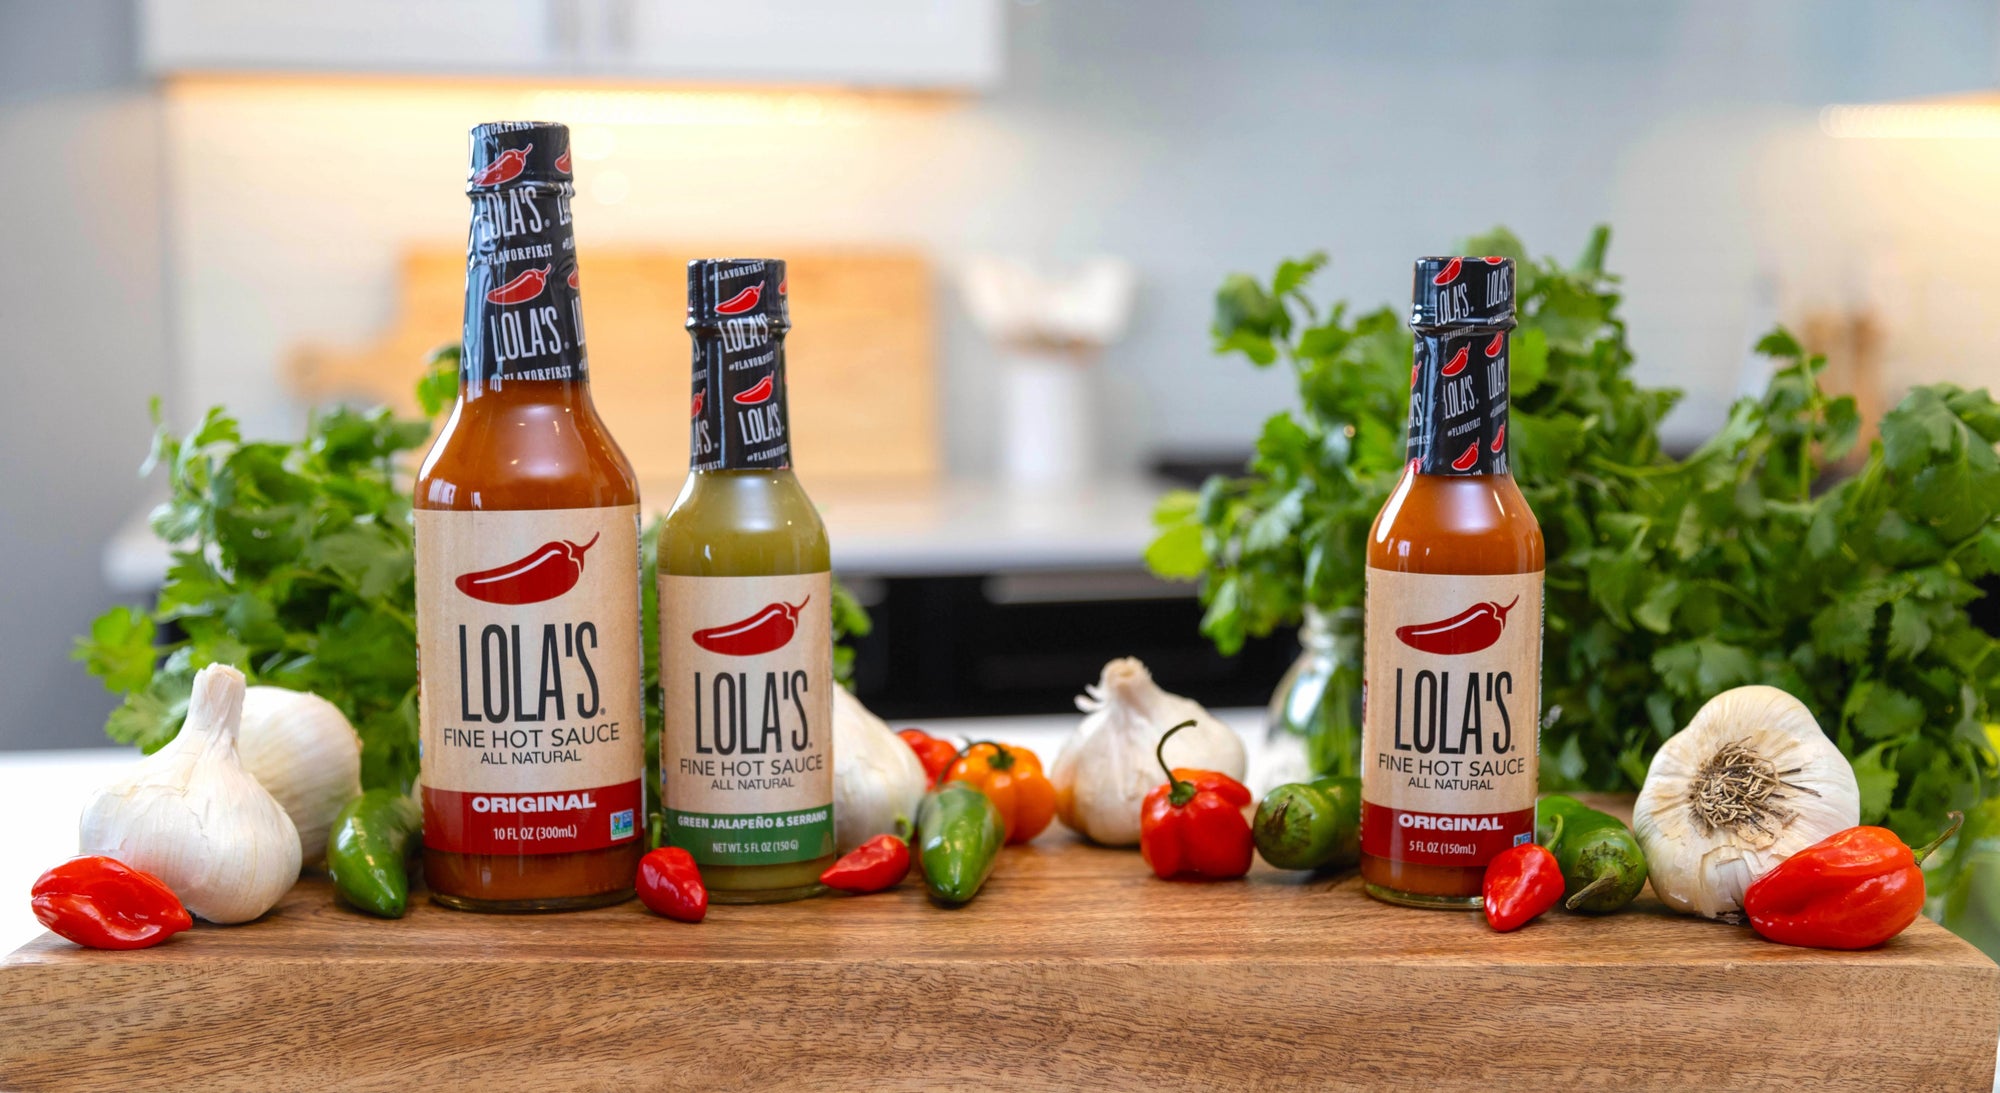 All Lola's Fine Hot Sauce Products